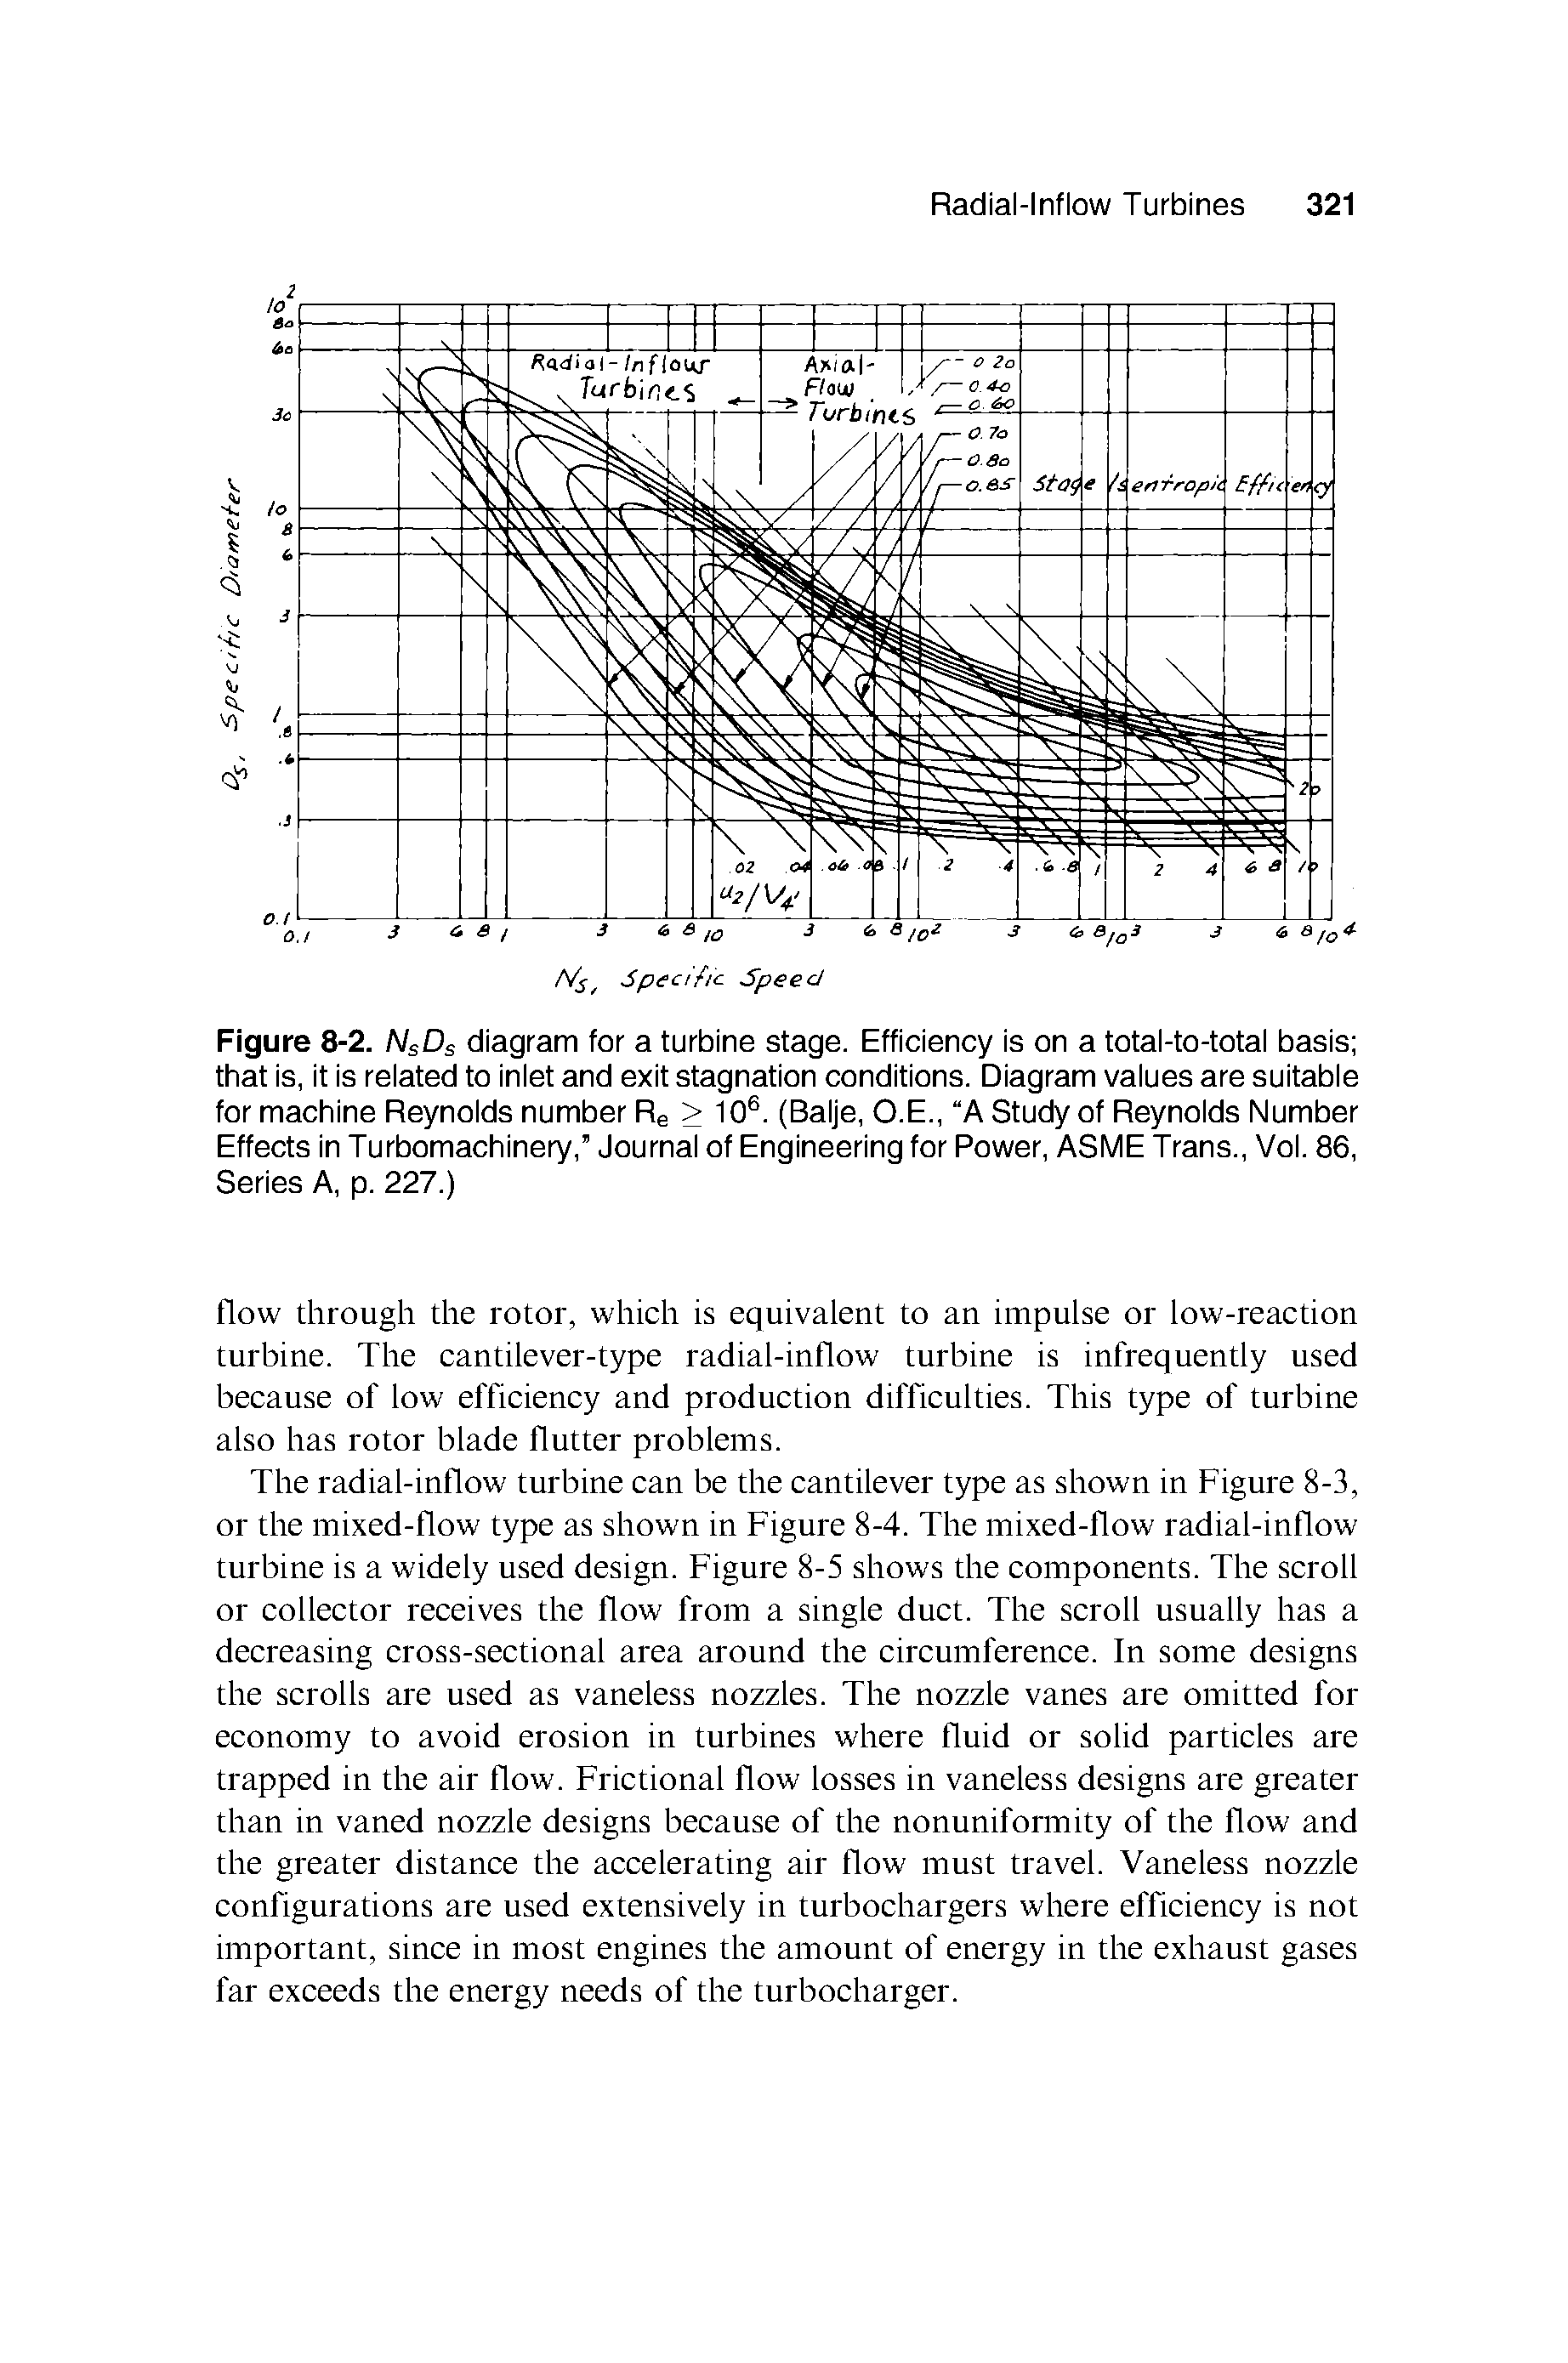 Figure 8-2. NsDs diagram for a turbine stage. Efficiency is on a total-to-total basis that is, it is related to inlet and exit stagnation conditions. Diagram values are suitable for machine Reynolds number Re > 10 . (Balje, O.E., A Study of Reynolds Number Effects in Turbomachinery, Journal of Engineering for Power, ASME Trans., Vol. 86, Series A, p. 227.)...